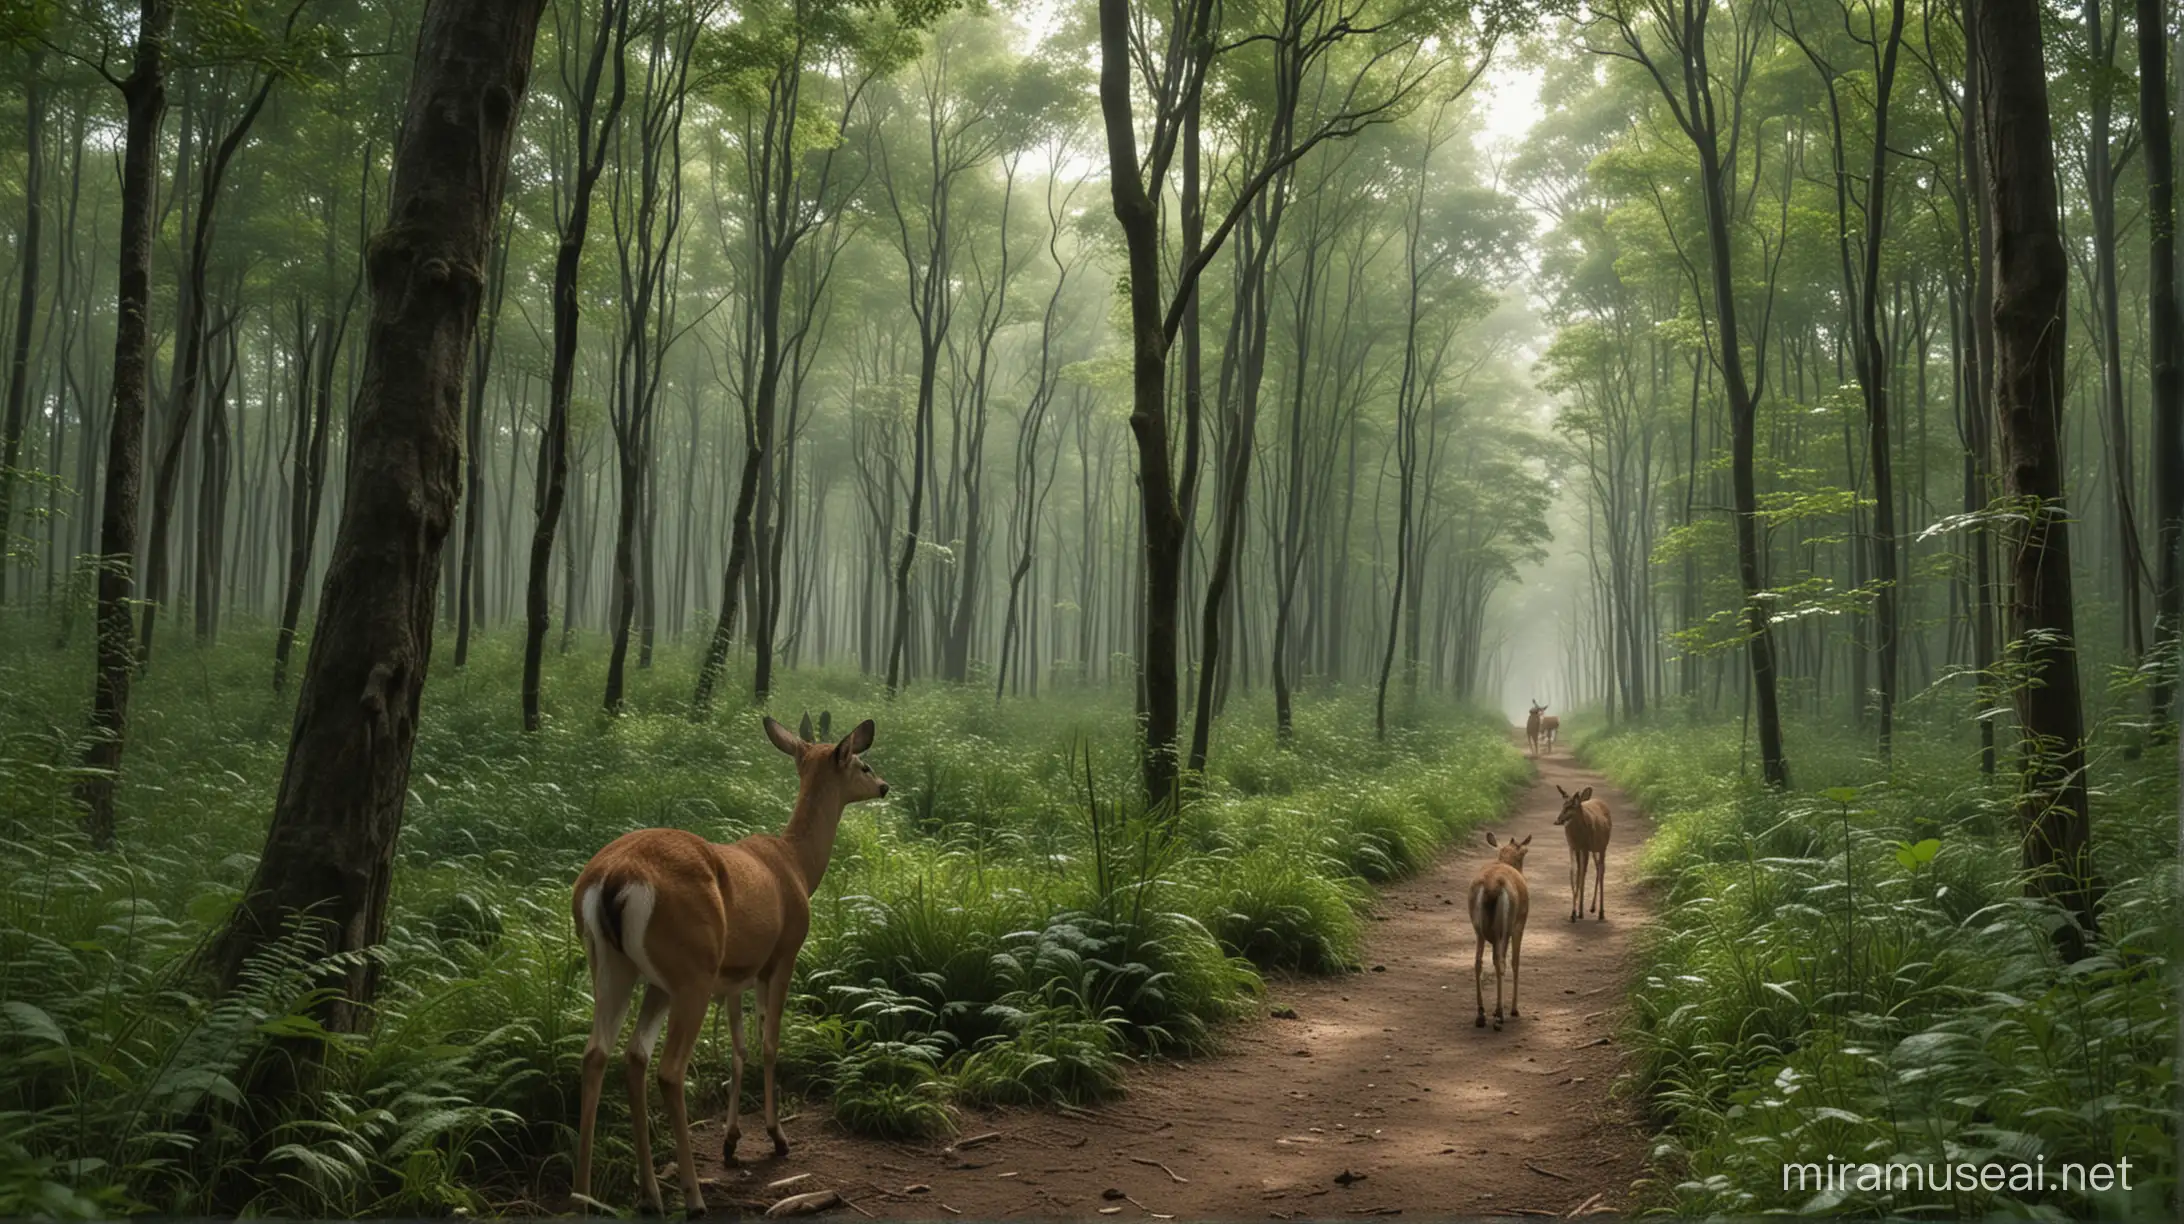 Lio walks through a forest trail, surrounded by lush greenery.
He smiles and takes a deep breath of fresh air.
A small deer grazes nearby, unfazed by Lio's presence